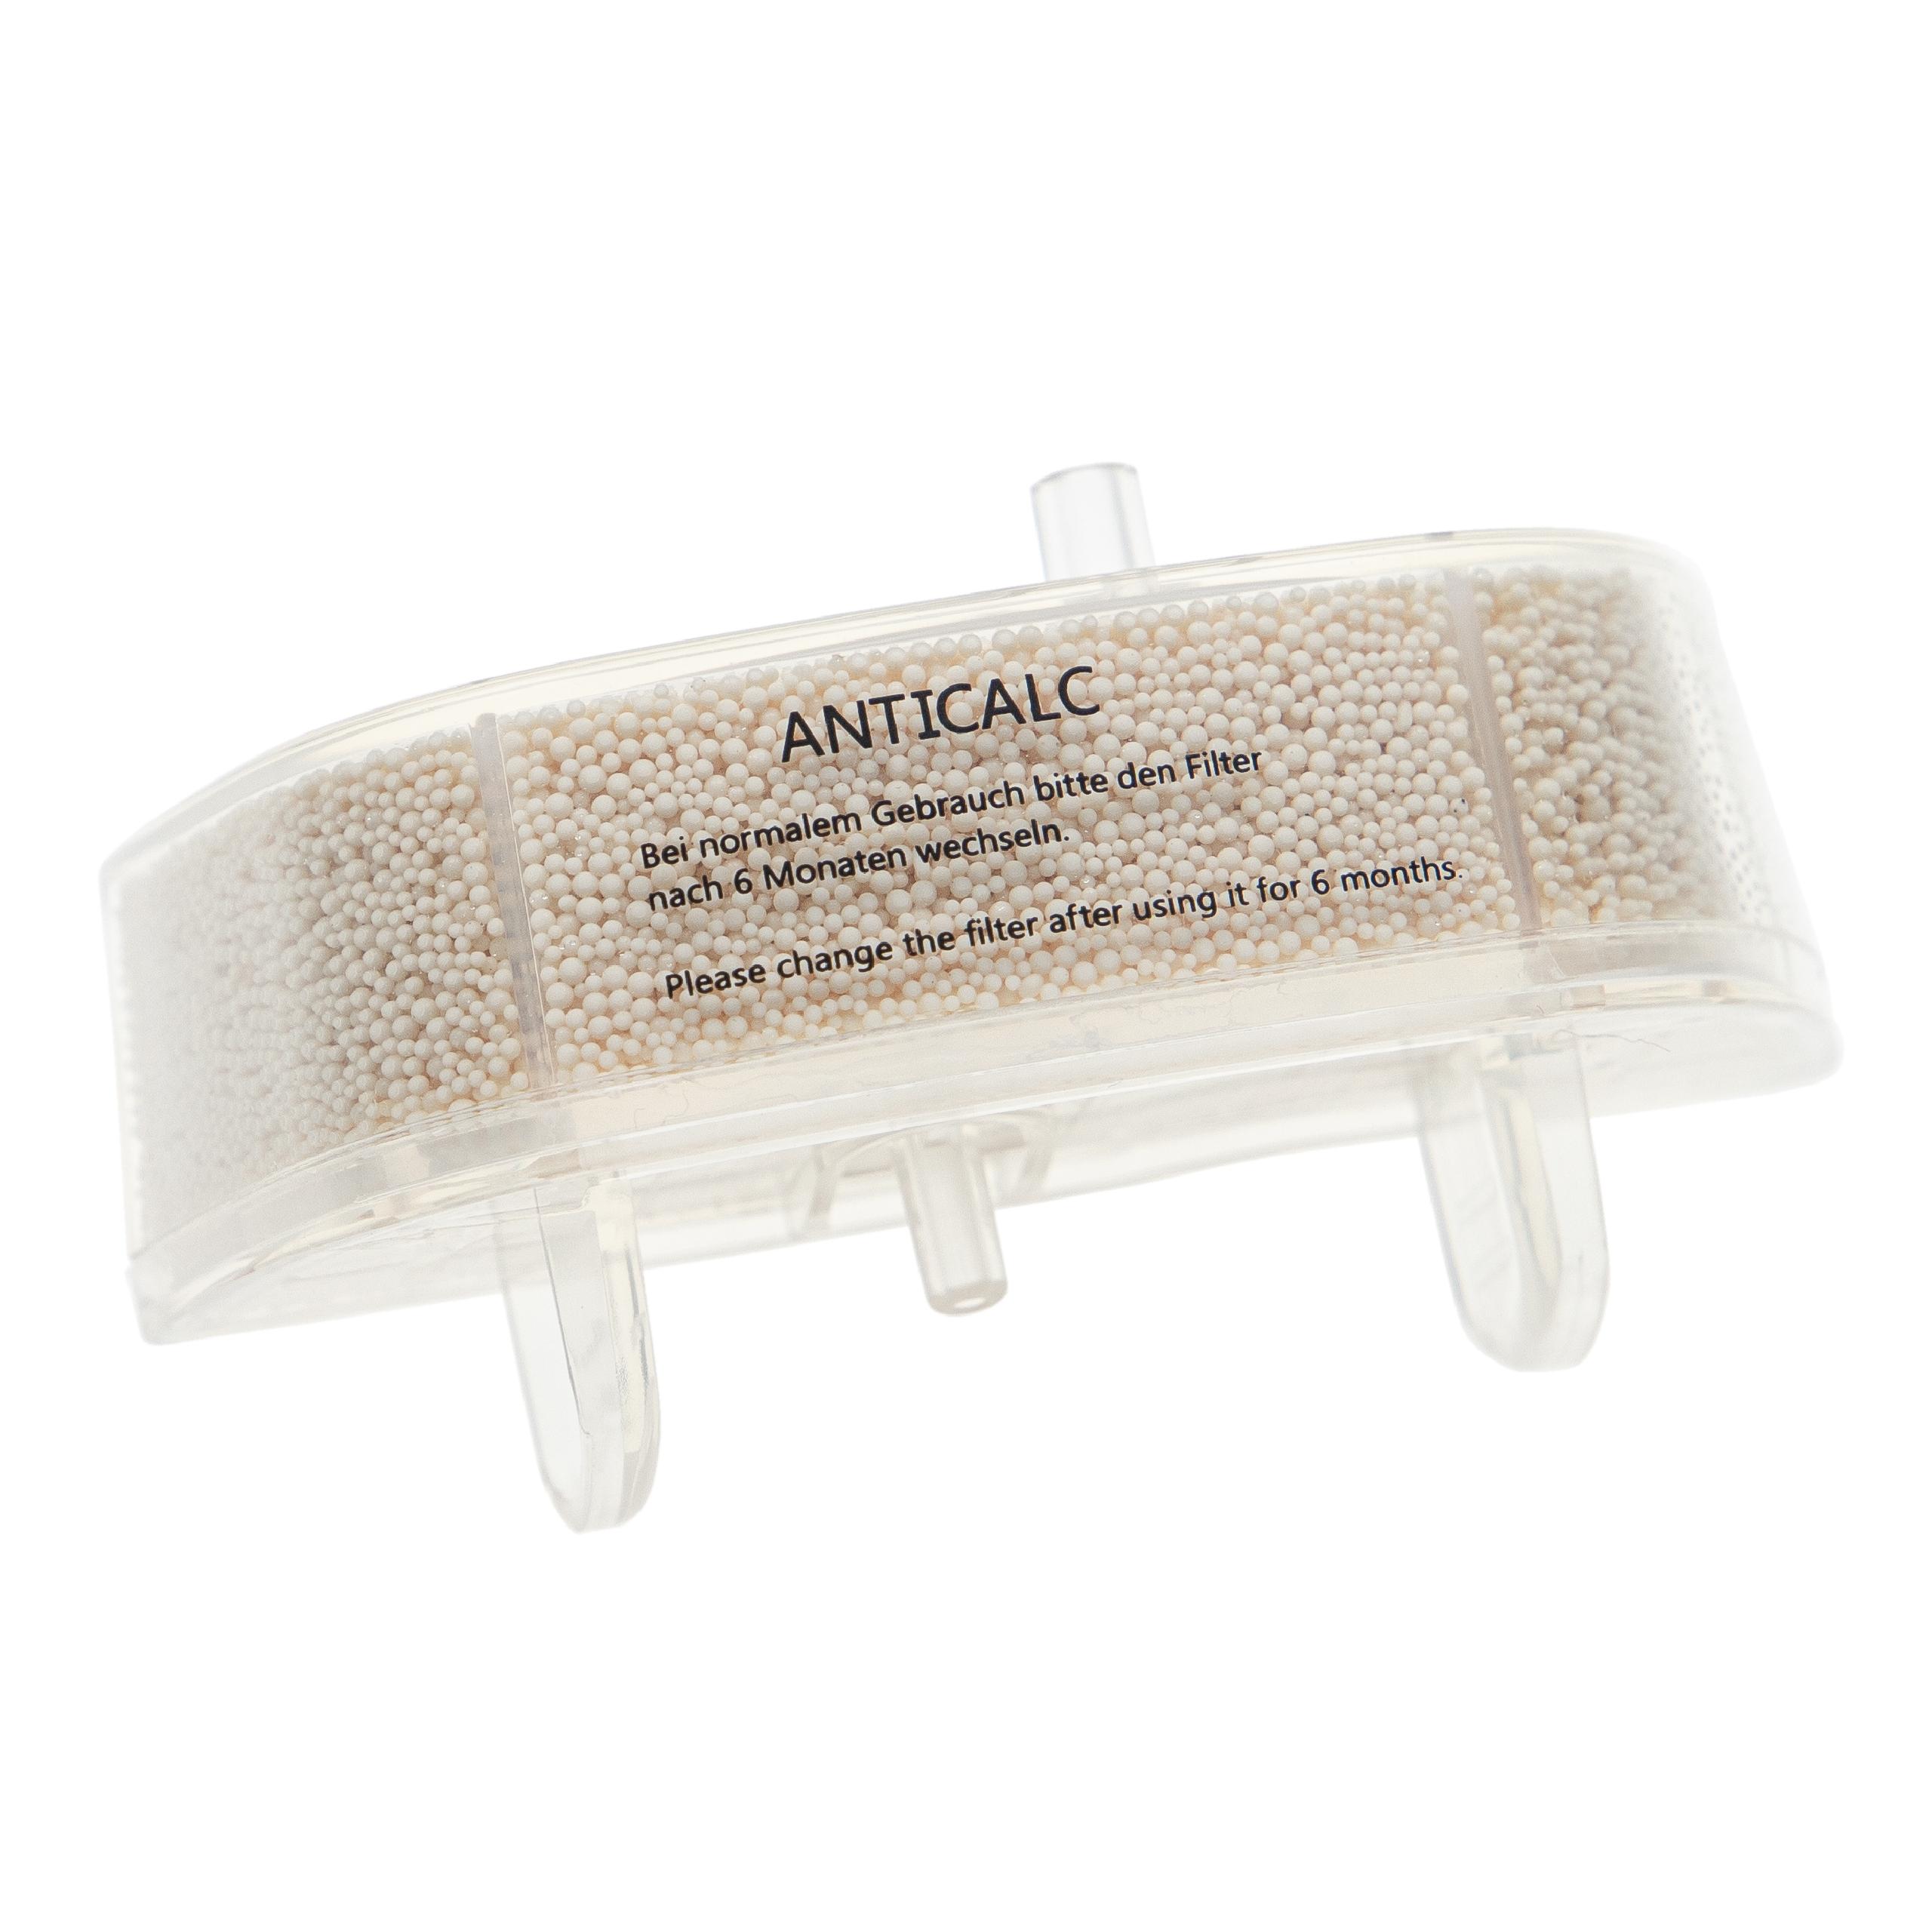 Anti-Calc Filter Cartridge replaces Rowenta ZR006501 for Rowenta Steam Cleaner